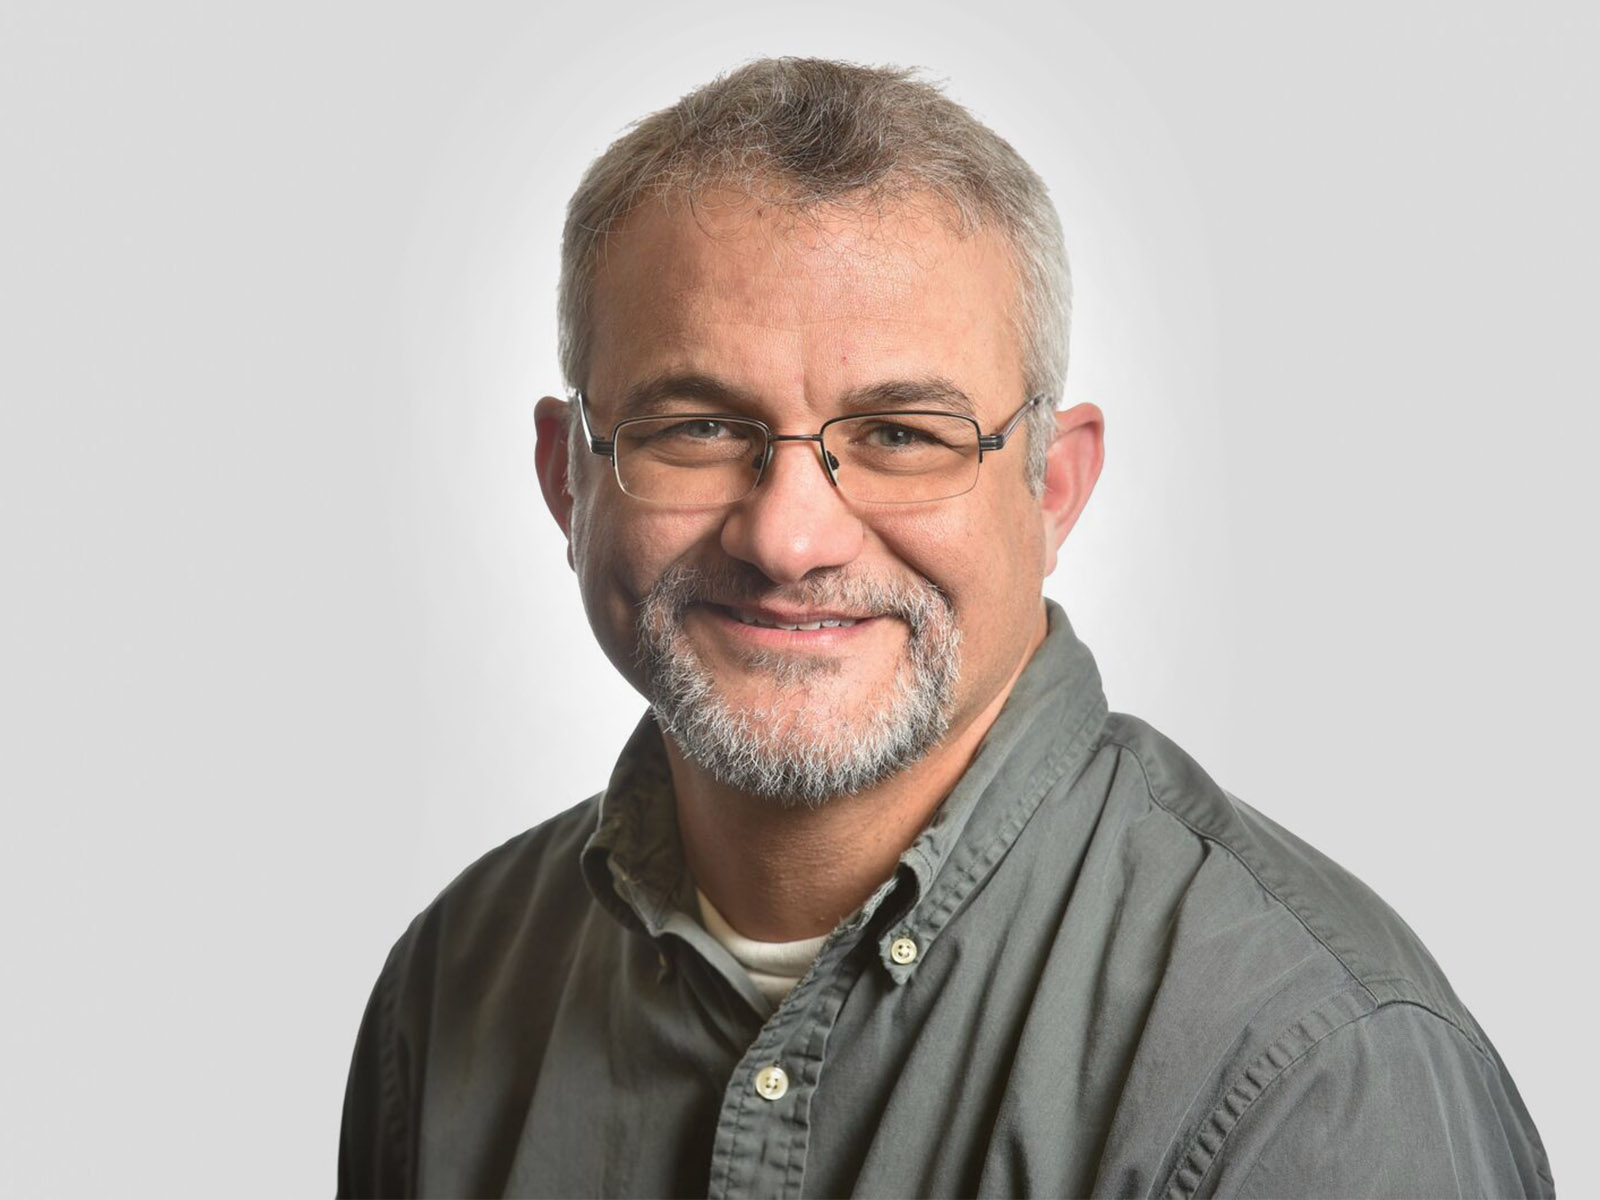 Smiling white man in gray shirt with gray hair/beard and glasses